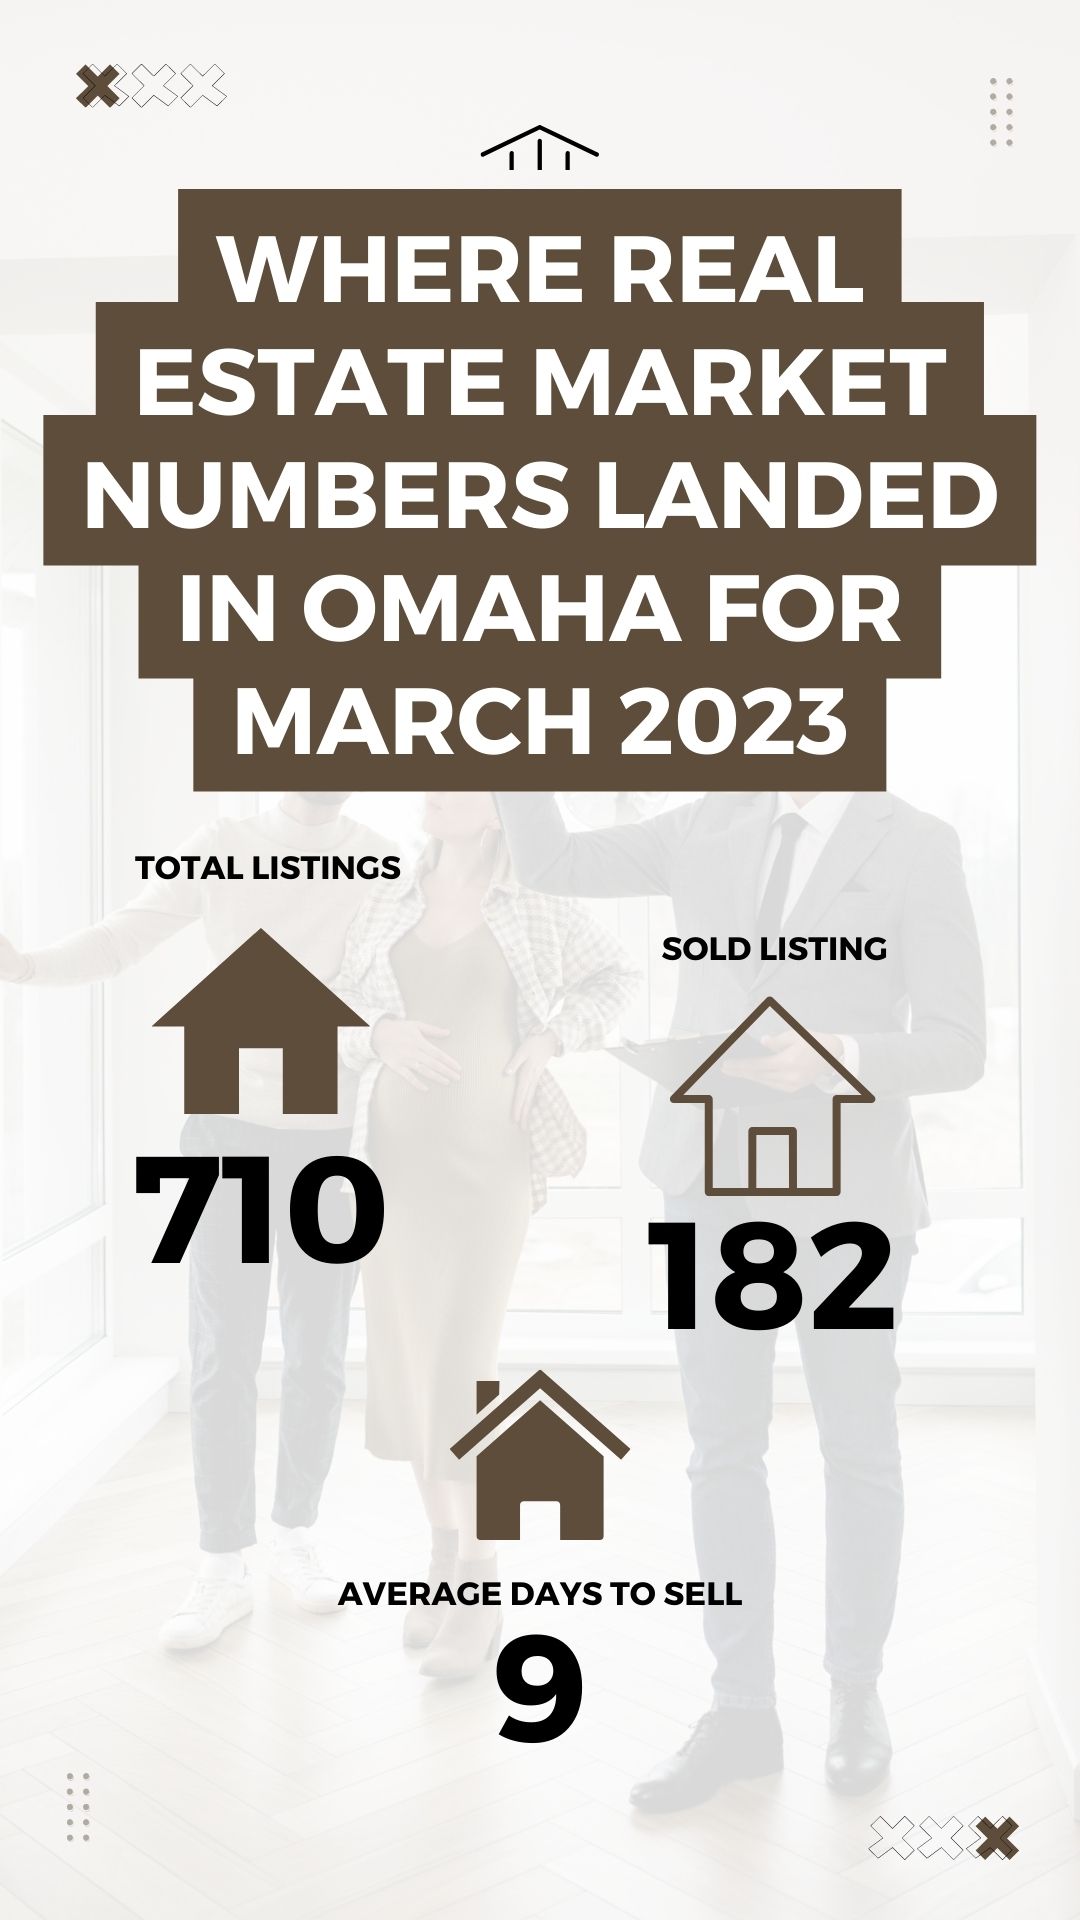 Where Real Estate Market Numbers Landed in Omaha for March 2023